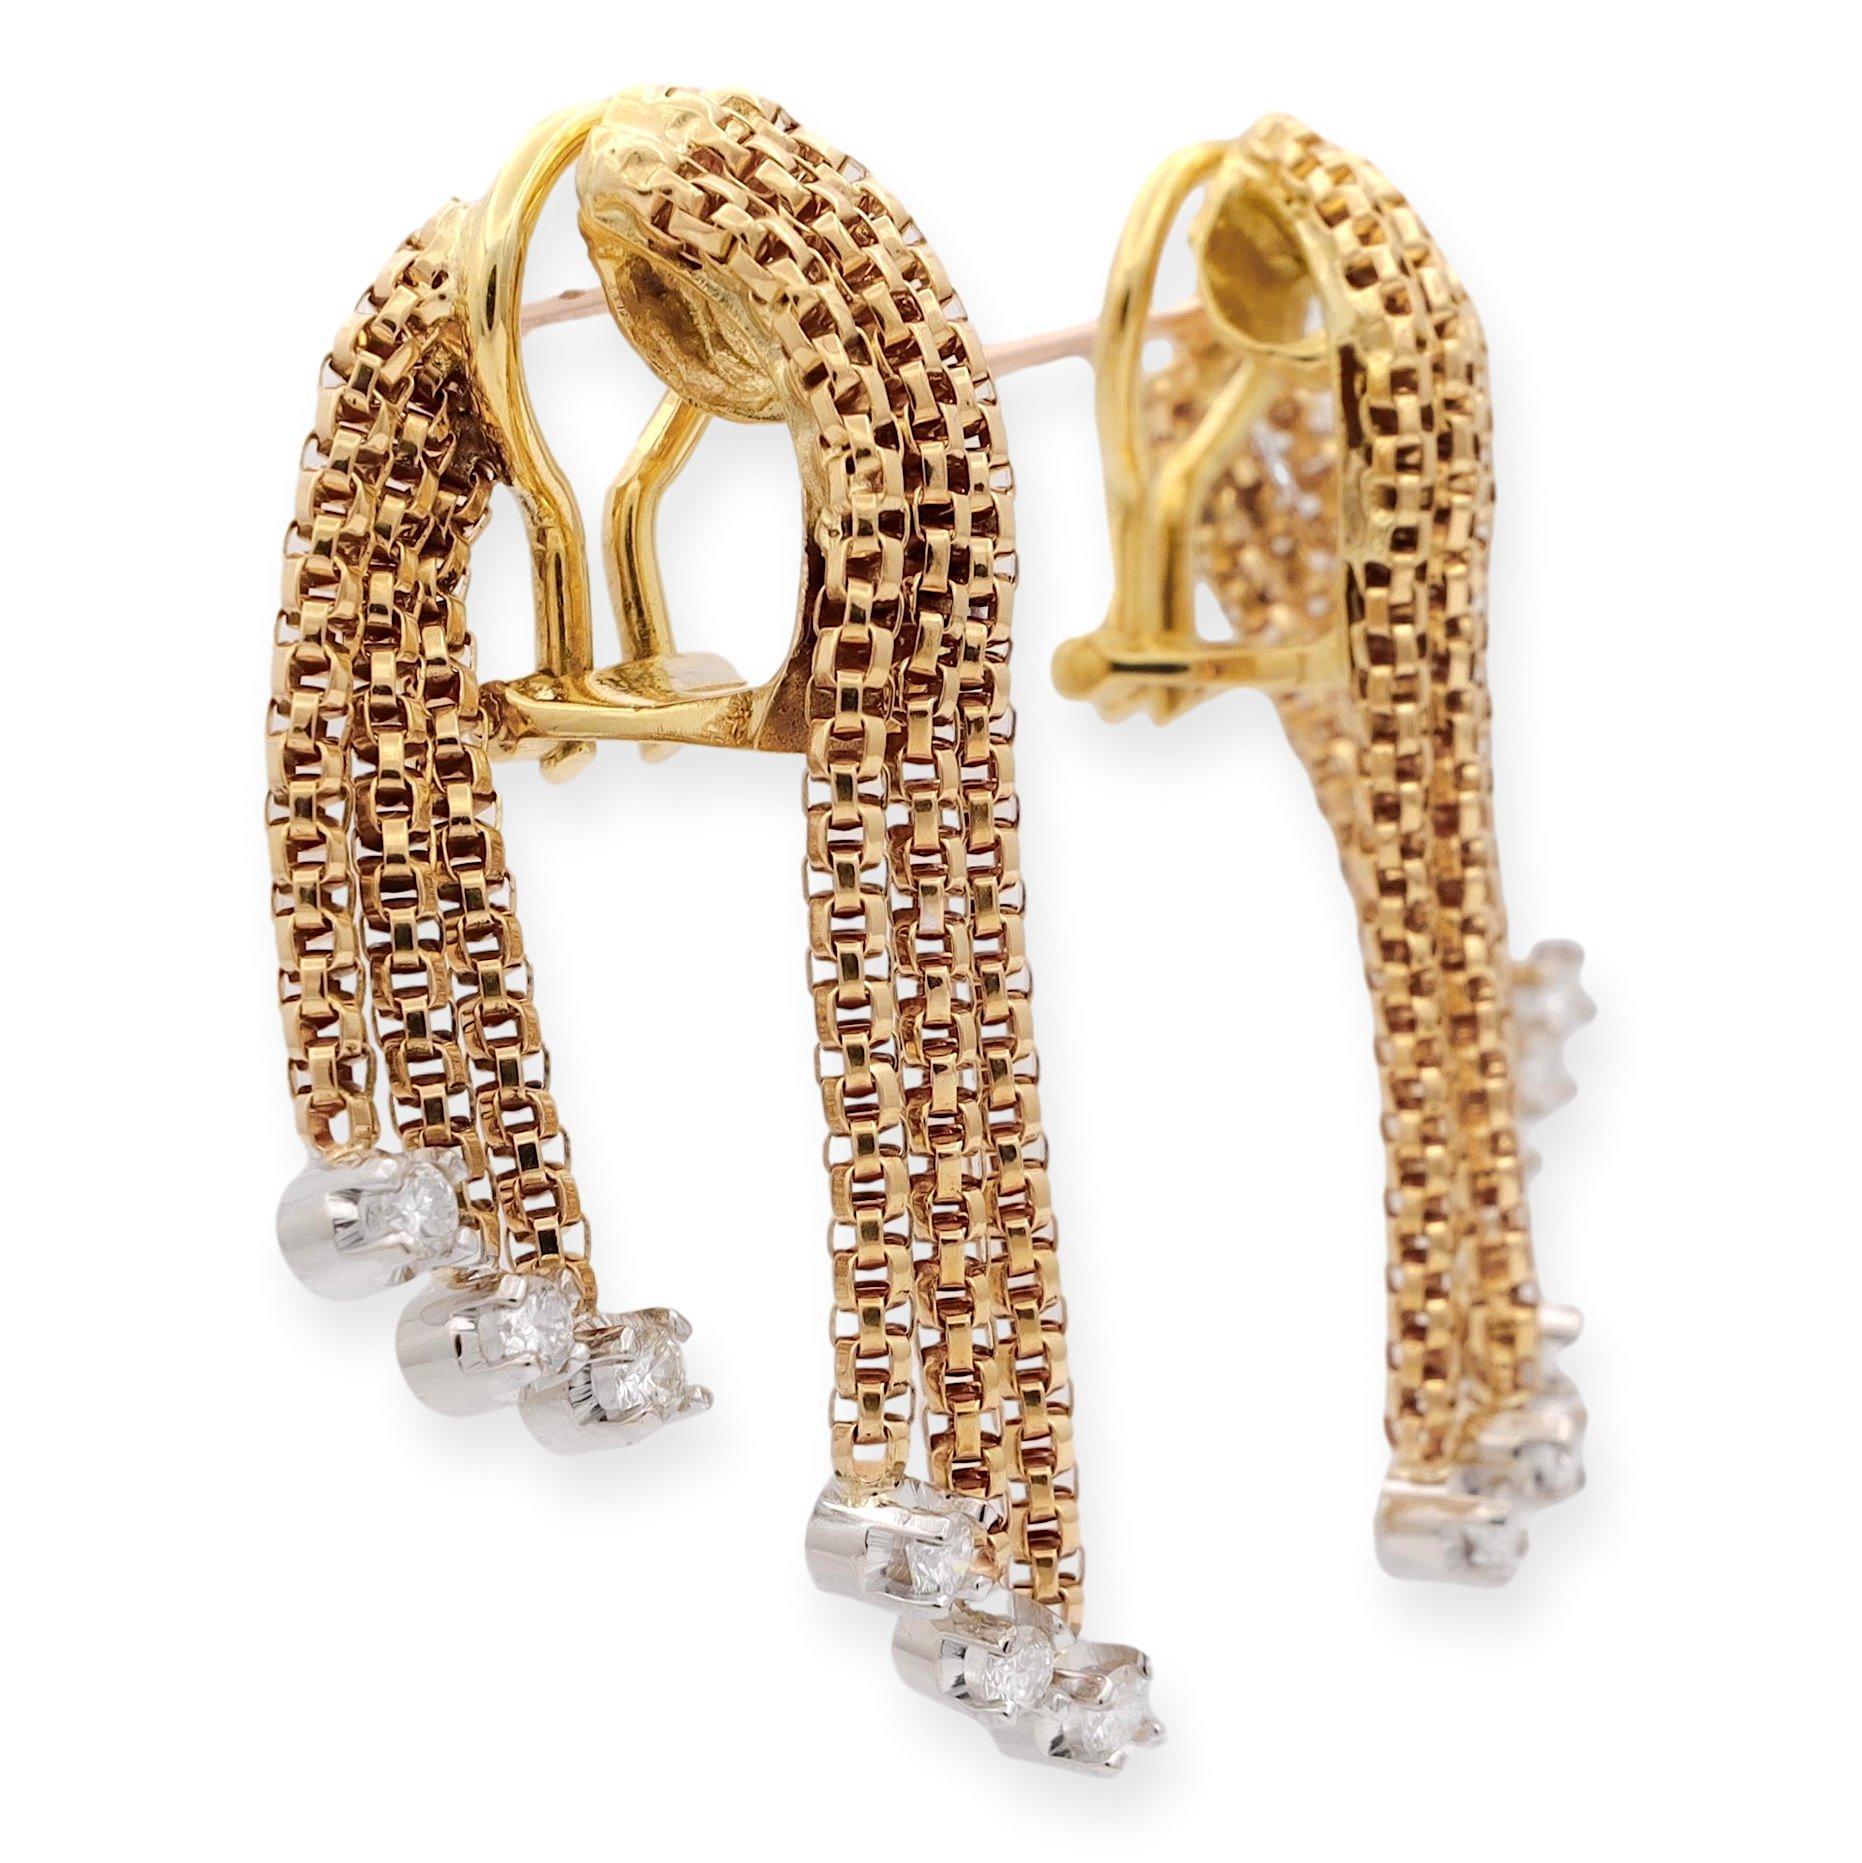 Vintage Drop Earrings, a testament to Italian craftsmanship. Finely crafted in 18 karat yellow gold, these gems feature a dozen round brilliant cut diamonds set in white gold prongs weighing a total of 0.60 carats approximately H-I in color and fine